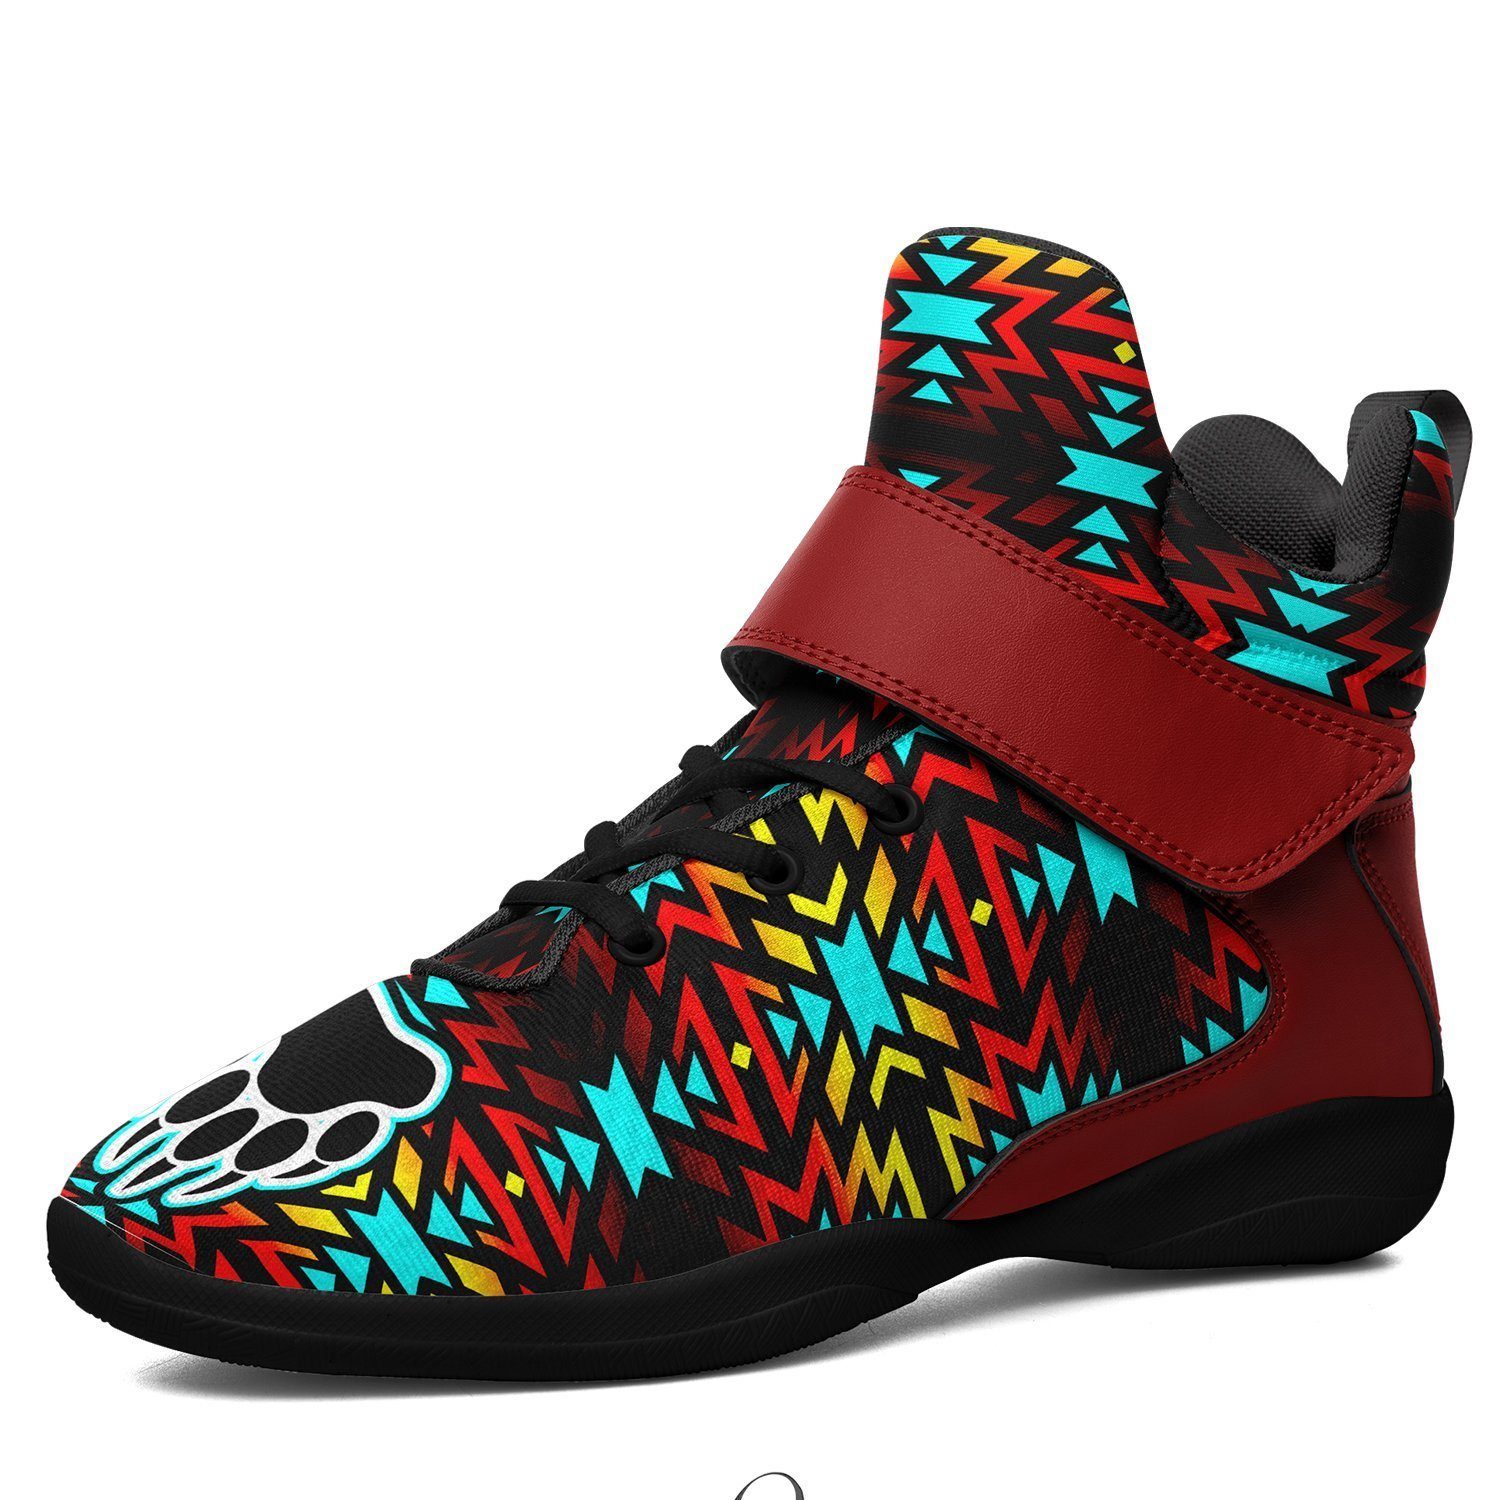 Fire Colors and Turquoise Bearpaw Kid's Ipottaa Basketball / Sport High Top Shoes 49 Dzine US Child 12.5 / EUR 30 Black Sole with Dark Red Strap 